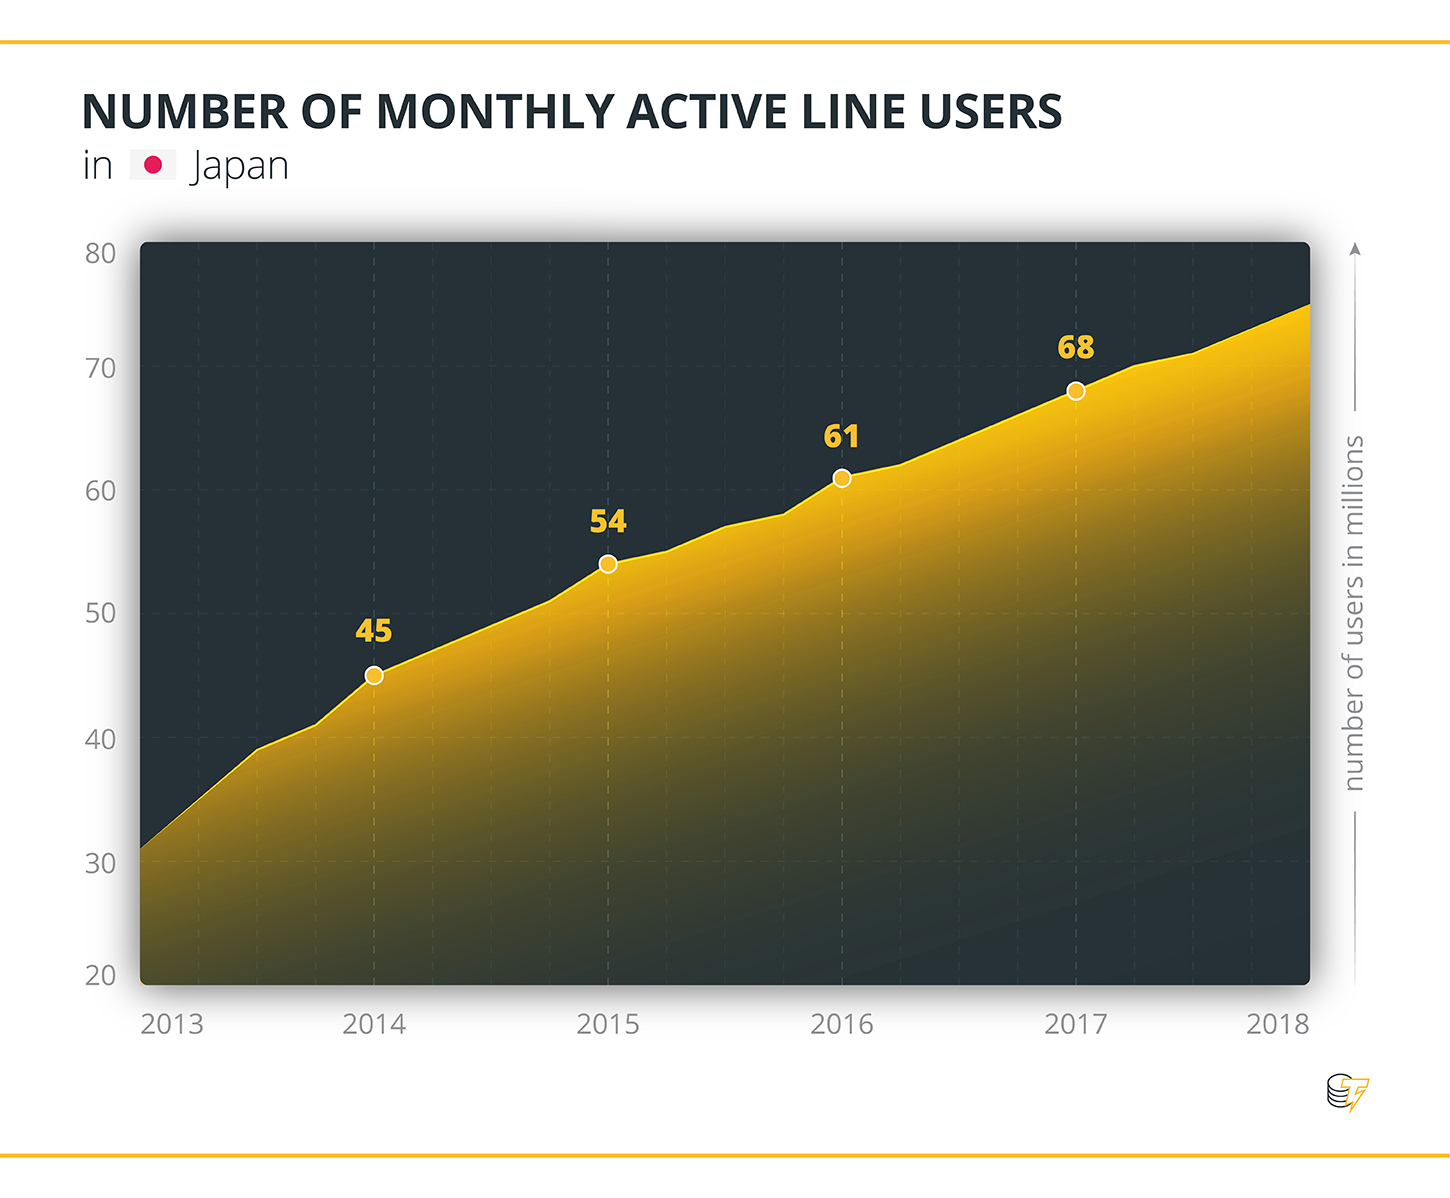 NUMBER OF MONTHLY ACTIVE LINE USERS